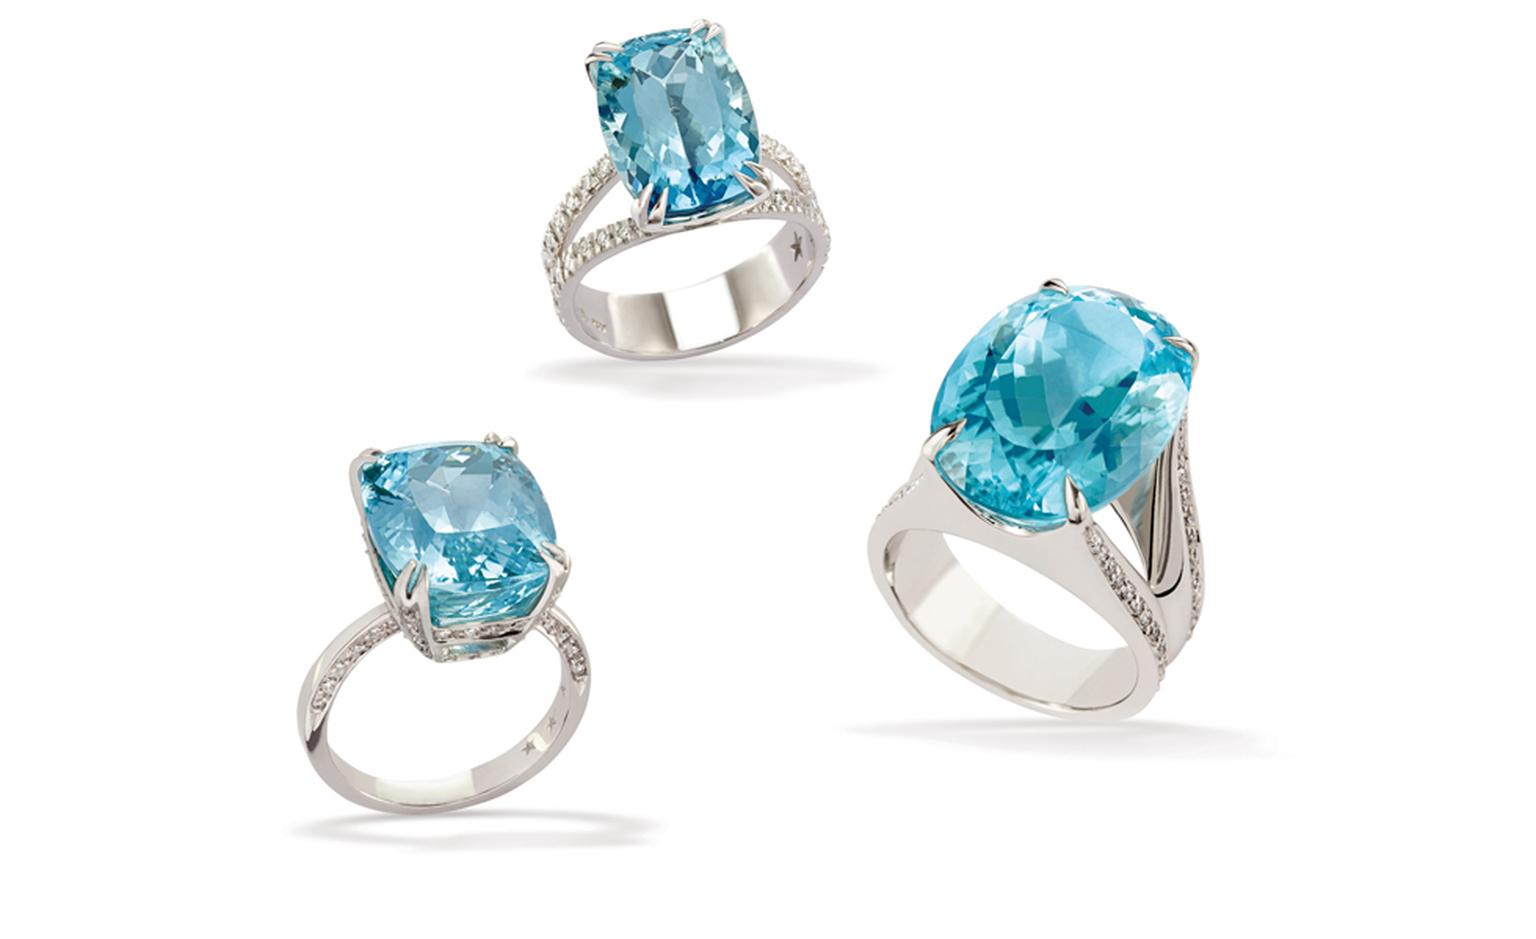 H.Stern tempts with exquisite Paraiba tourmalines